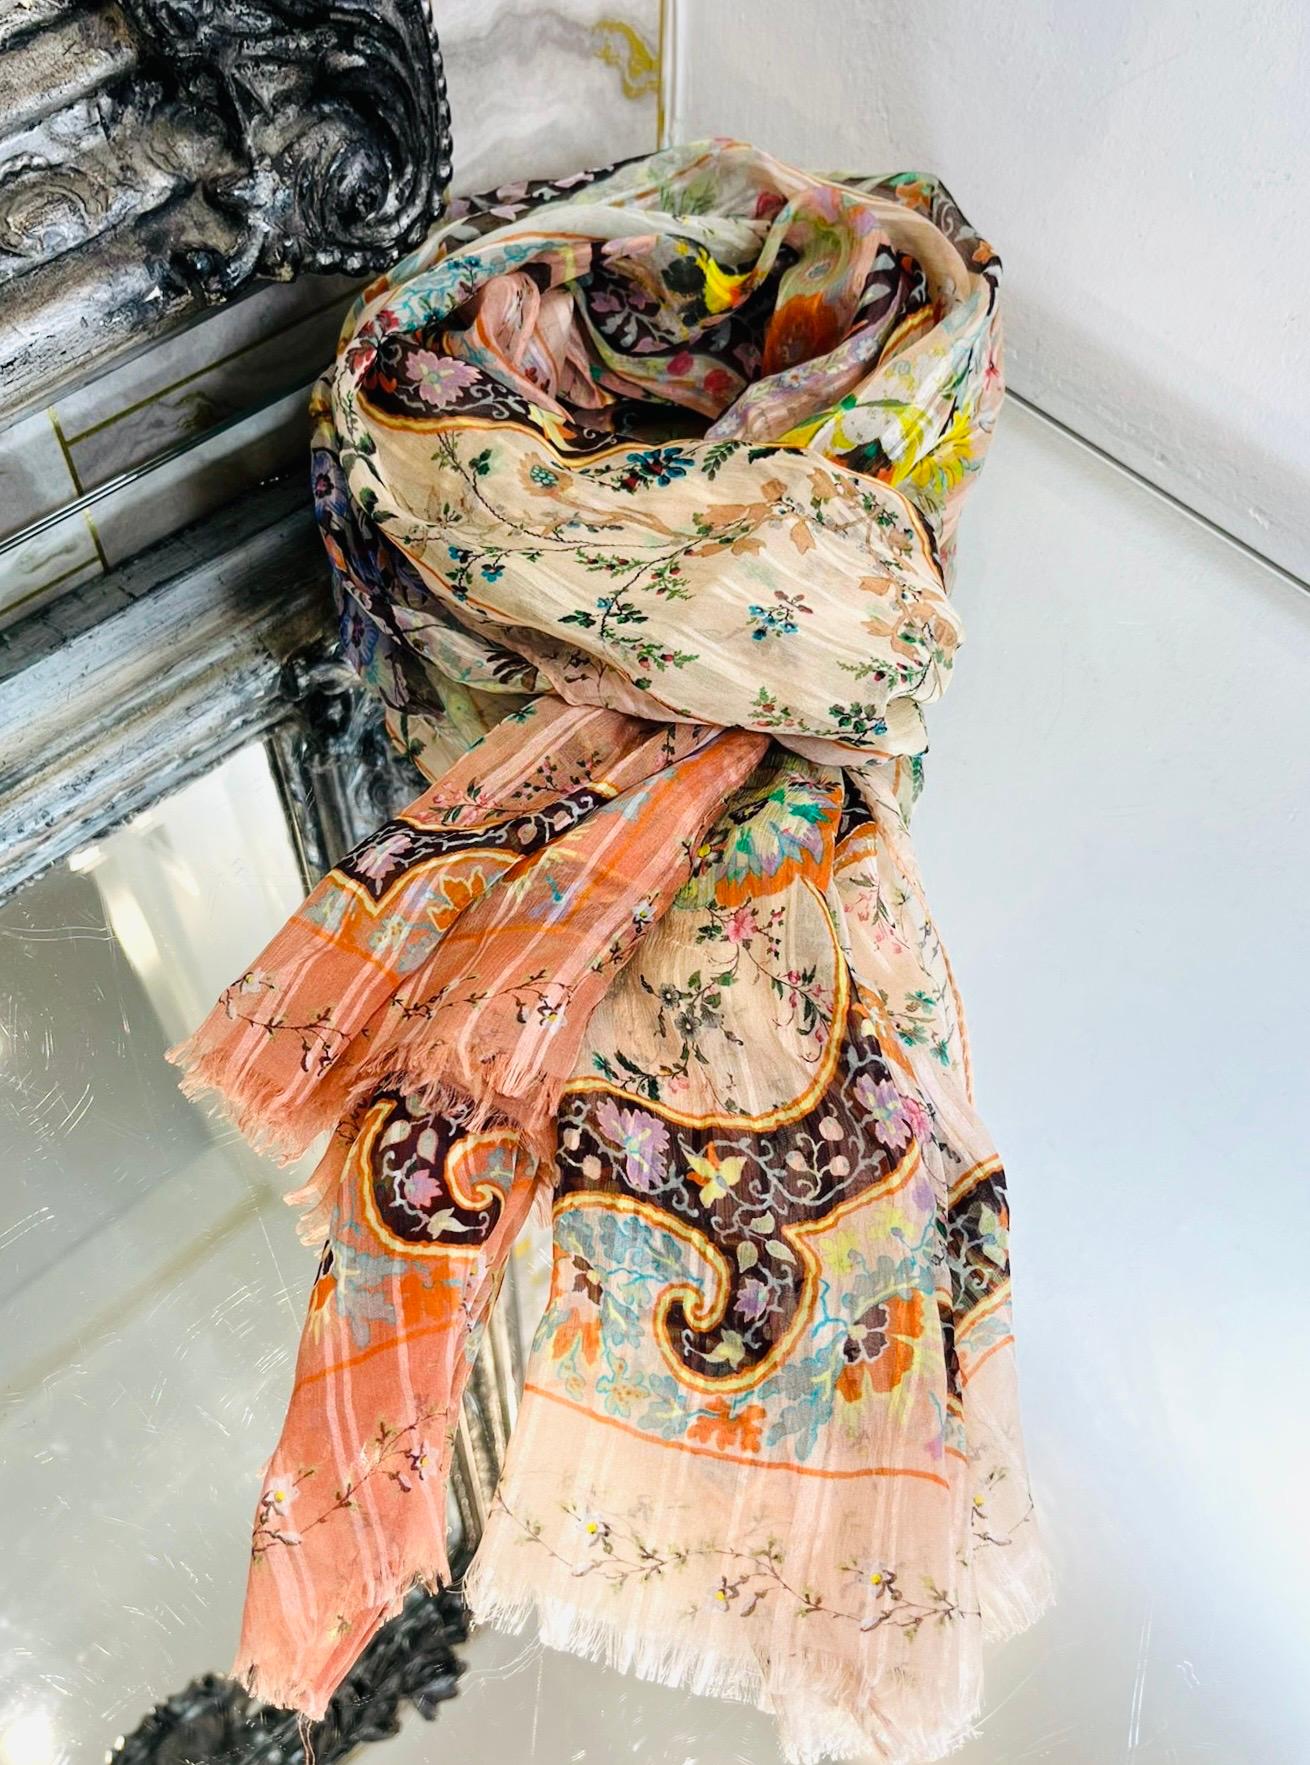 Etro Paisley Print Cashmere & Silk Scarf

Multicoloured scarf designed with the brand's signature Paisley print throughout.

Featuring fringe edges and peach ombre effect background.

Size – 172cm x 63cm

Condition – Very Good 

Composition –